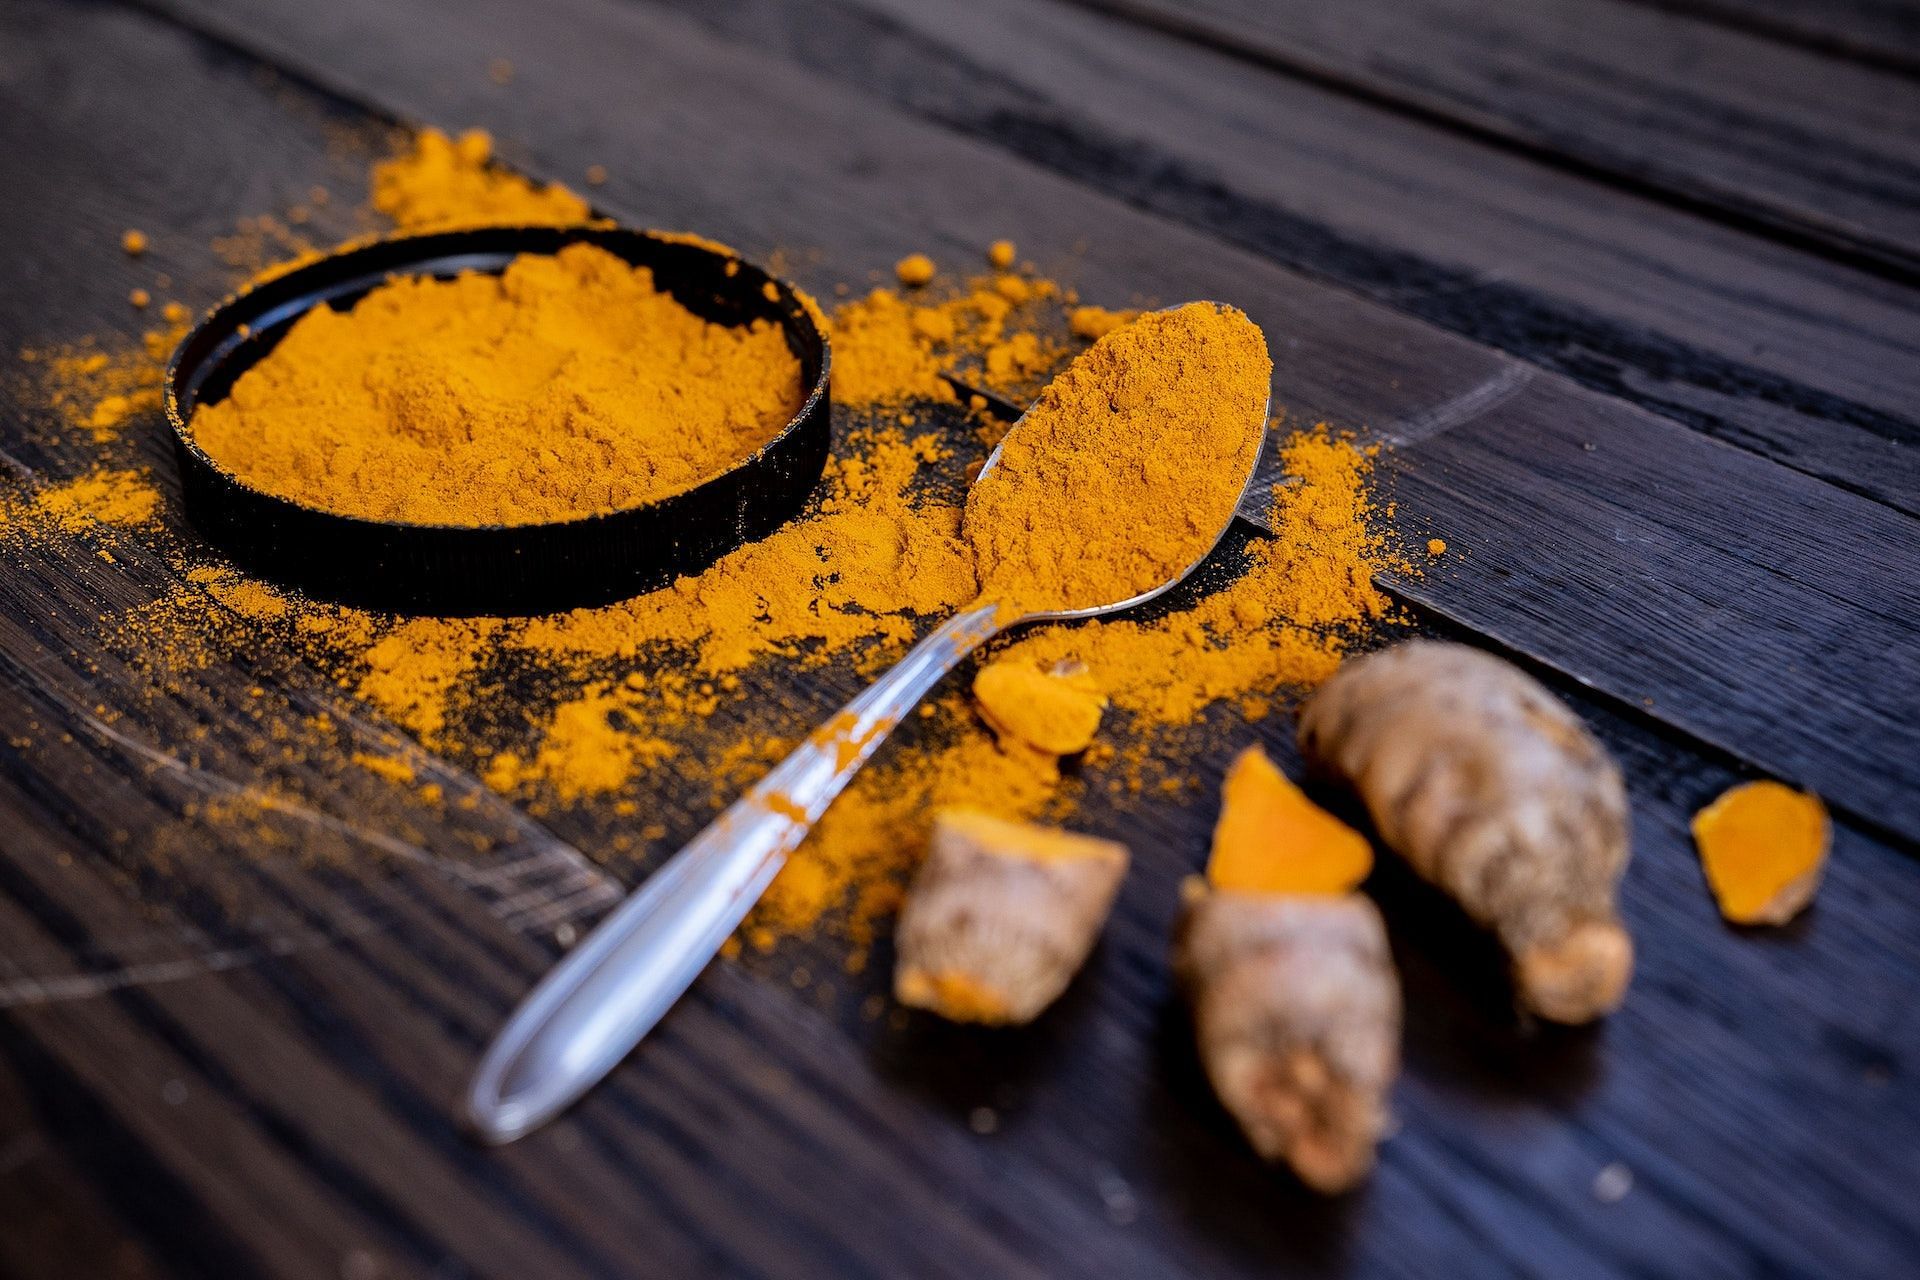 Turmeric is the most widely used herb. (Photo via Pexels/Karl Solano)